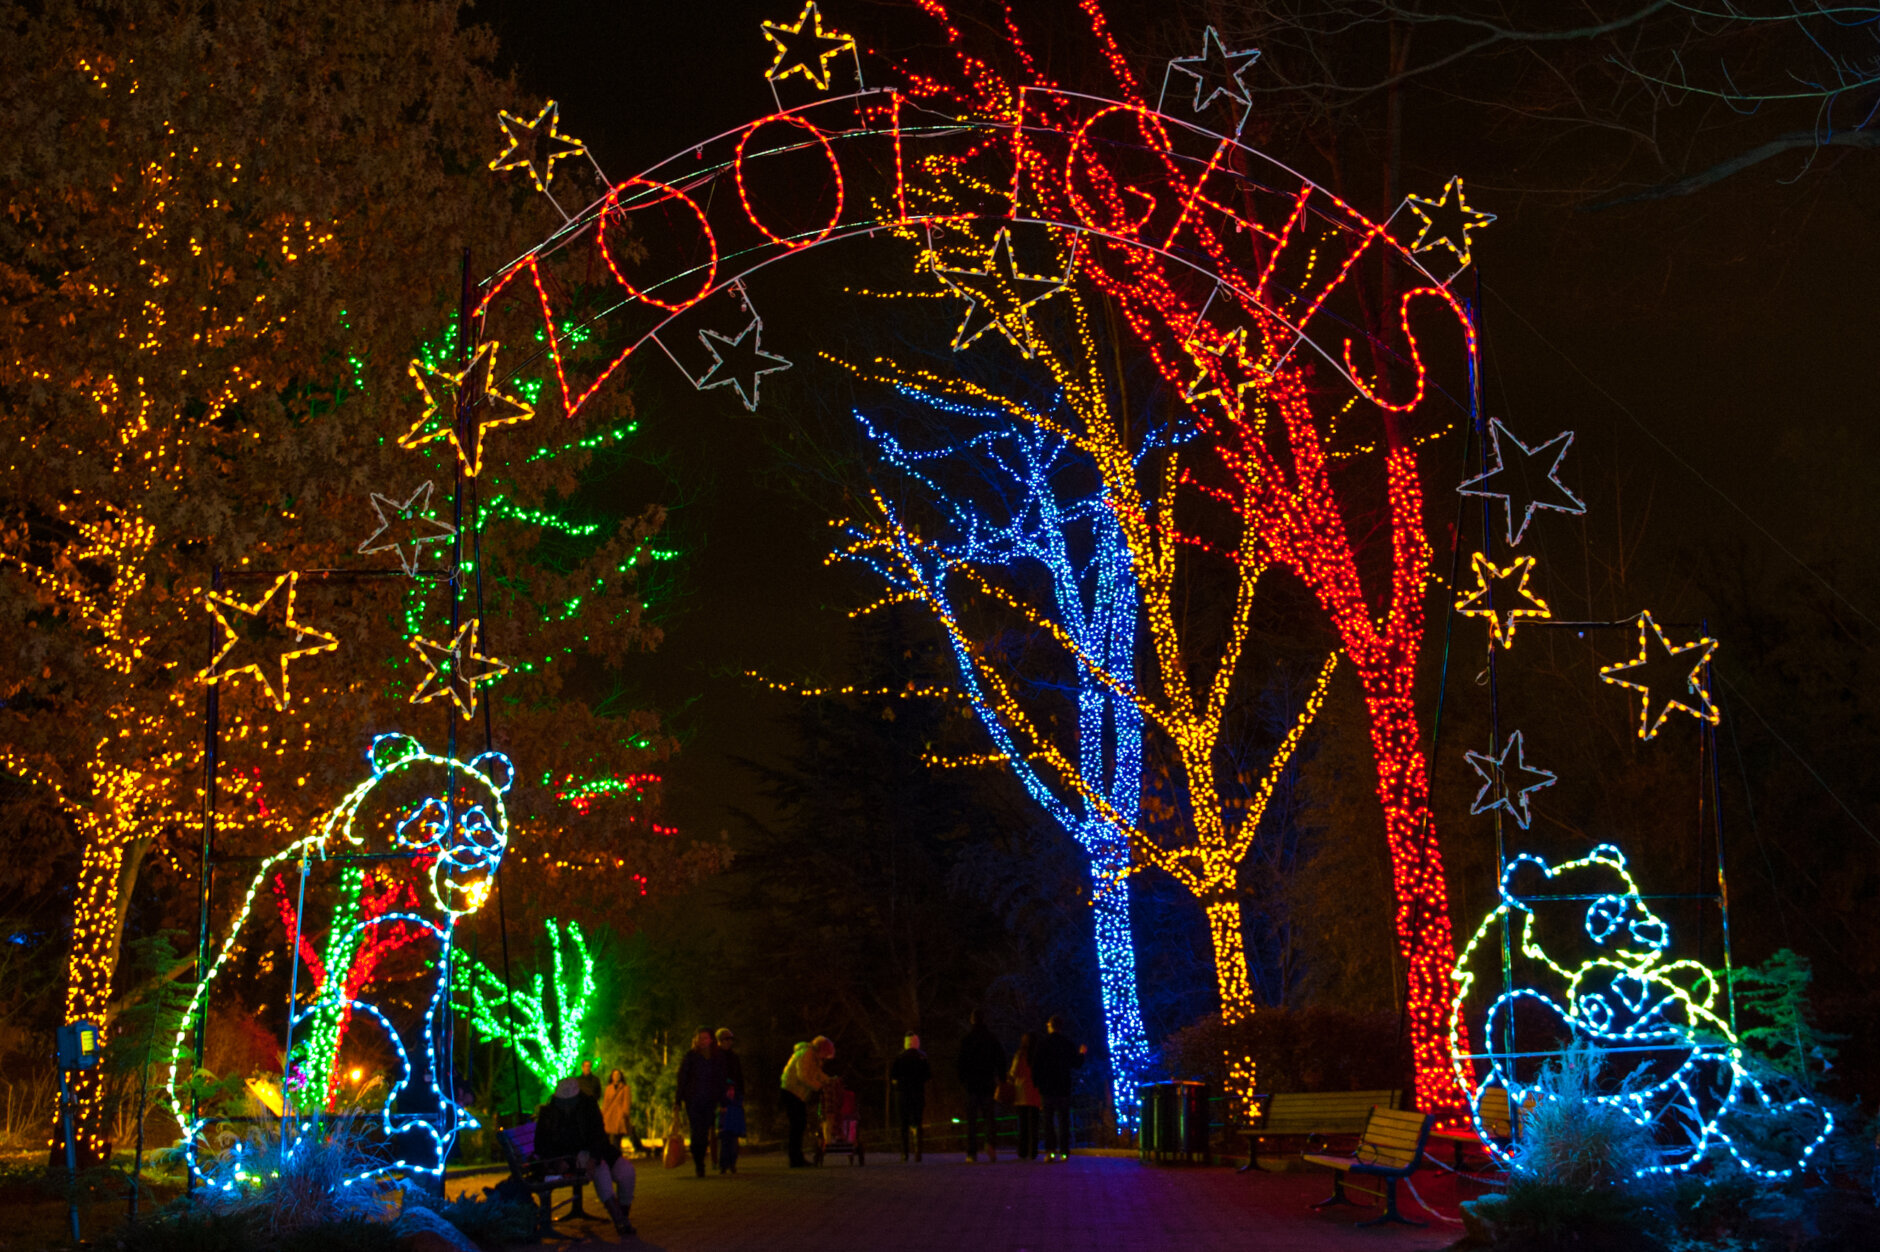 <p>Smithsonian is rolling out the <strong>ZooLights Express</strong>.</p>
<p>The ZooLights Express truck will visit one D.C., ward on the following Friday and Saturday nights from 6 p.m. to 8 p.m. The truck already visited Wards 1, 2, 3 and 4. Below are the remaining dates.</p>
<p>Friday, Dec. 11 — Ward 5<br />
Saturday, Dec. 12 — Ward 6<br />
Friday, Dec. 18 — Ward 7<br />
Saturday, Dec. 19 — Ward 8</p>
<p>For more information, <a href="https://wtop.com/christmas-news/2020/11/zoolights-2020-faq-what-you-need-to-know/" target="_blank" rel="noopener">visit WTOP&#8217;s ZooLights guide</a>.</p>
